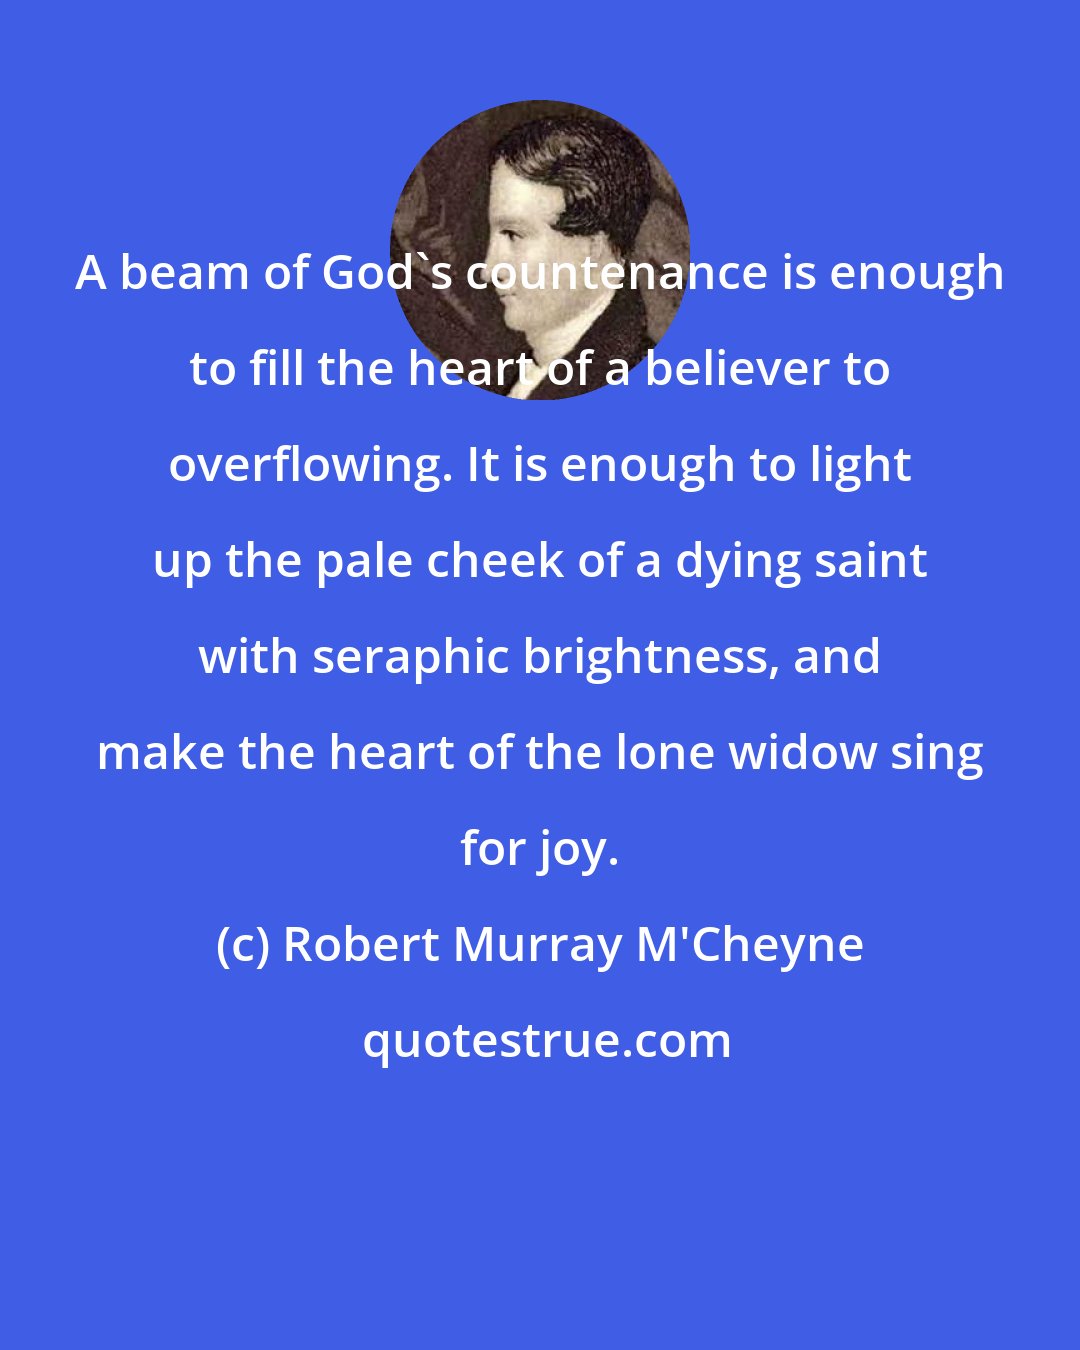 Robert Murray M'Cheyne: A beam of God's countenance is enough to fill the heart of a believer to overflowing. It is enough to light up the pale cheek of a dying saint with seraphic brightness, and make the heart of the lone widow sing for joy.